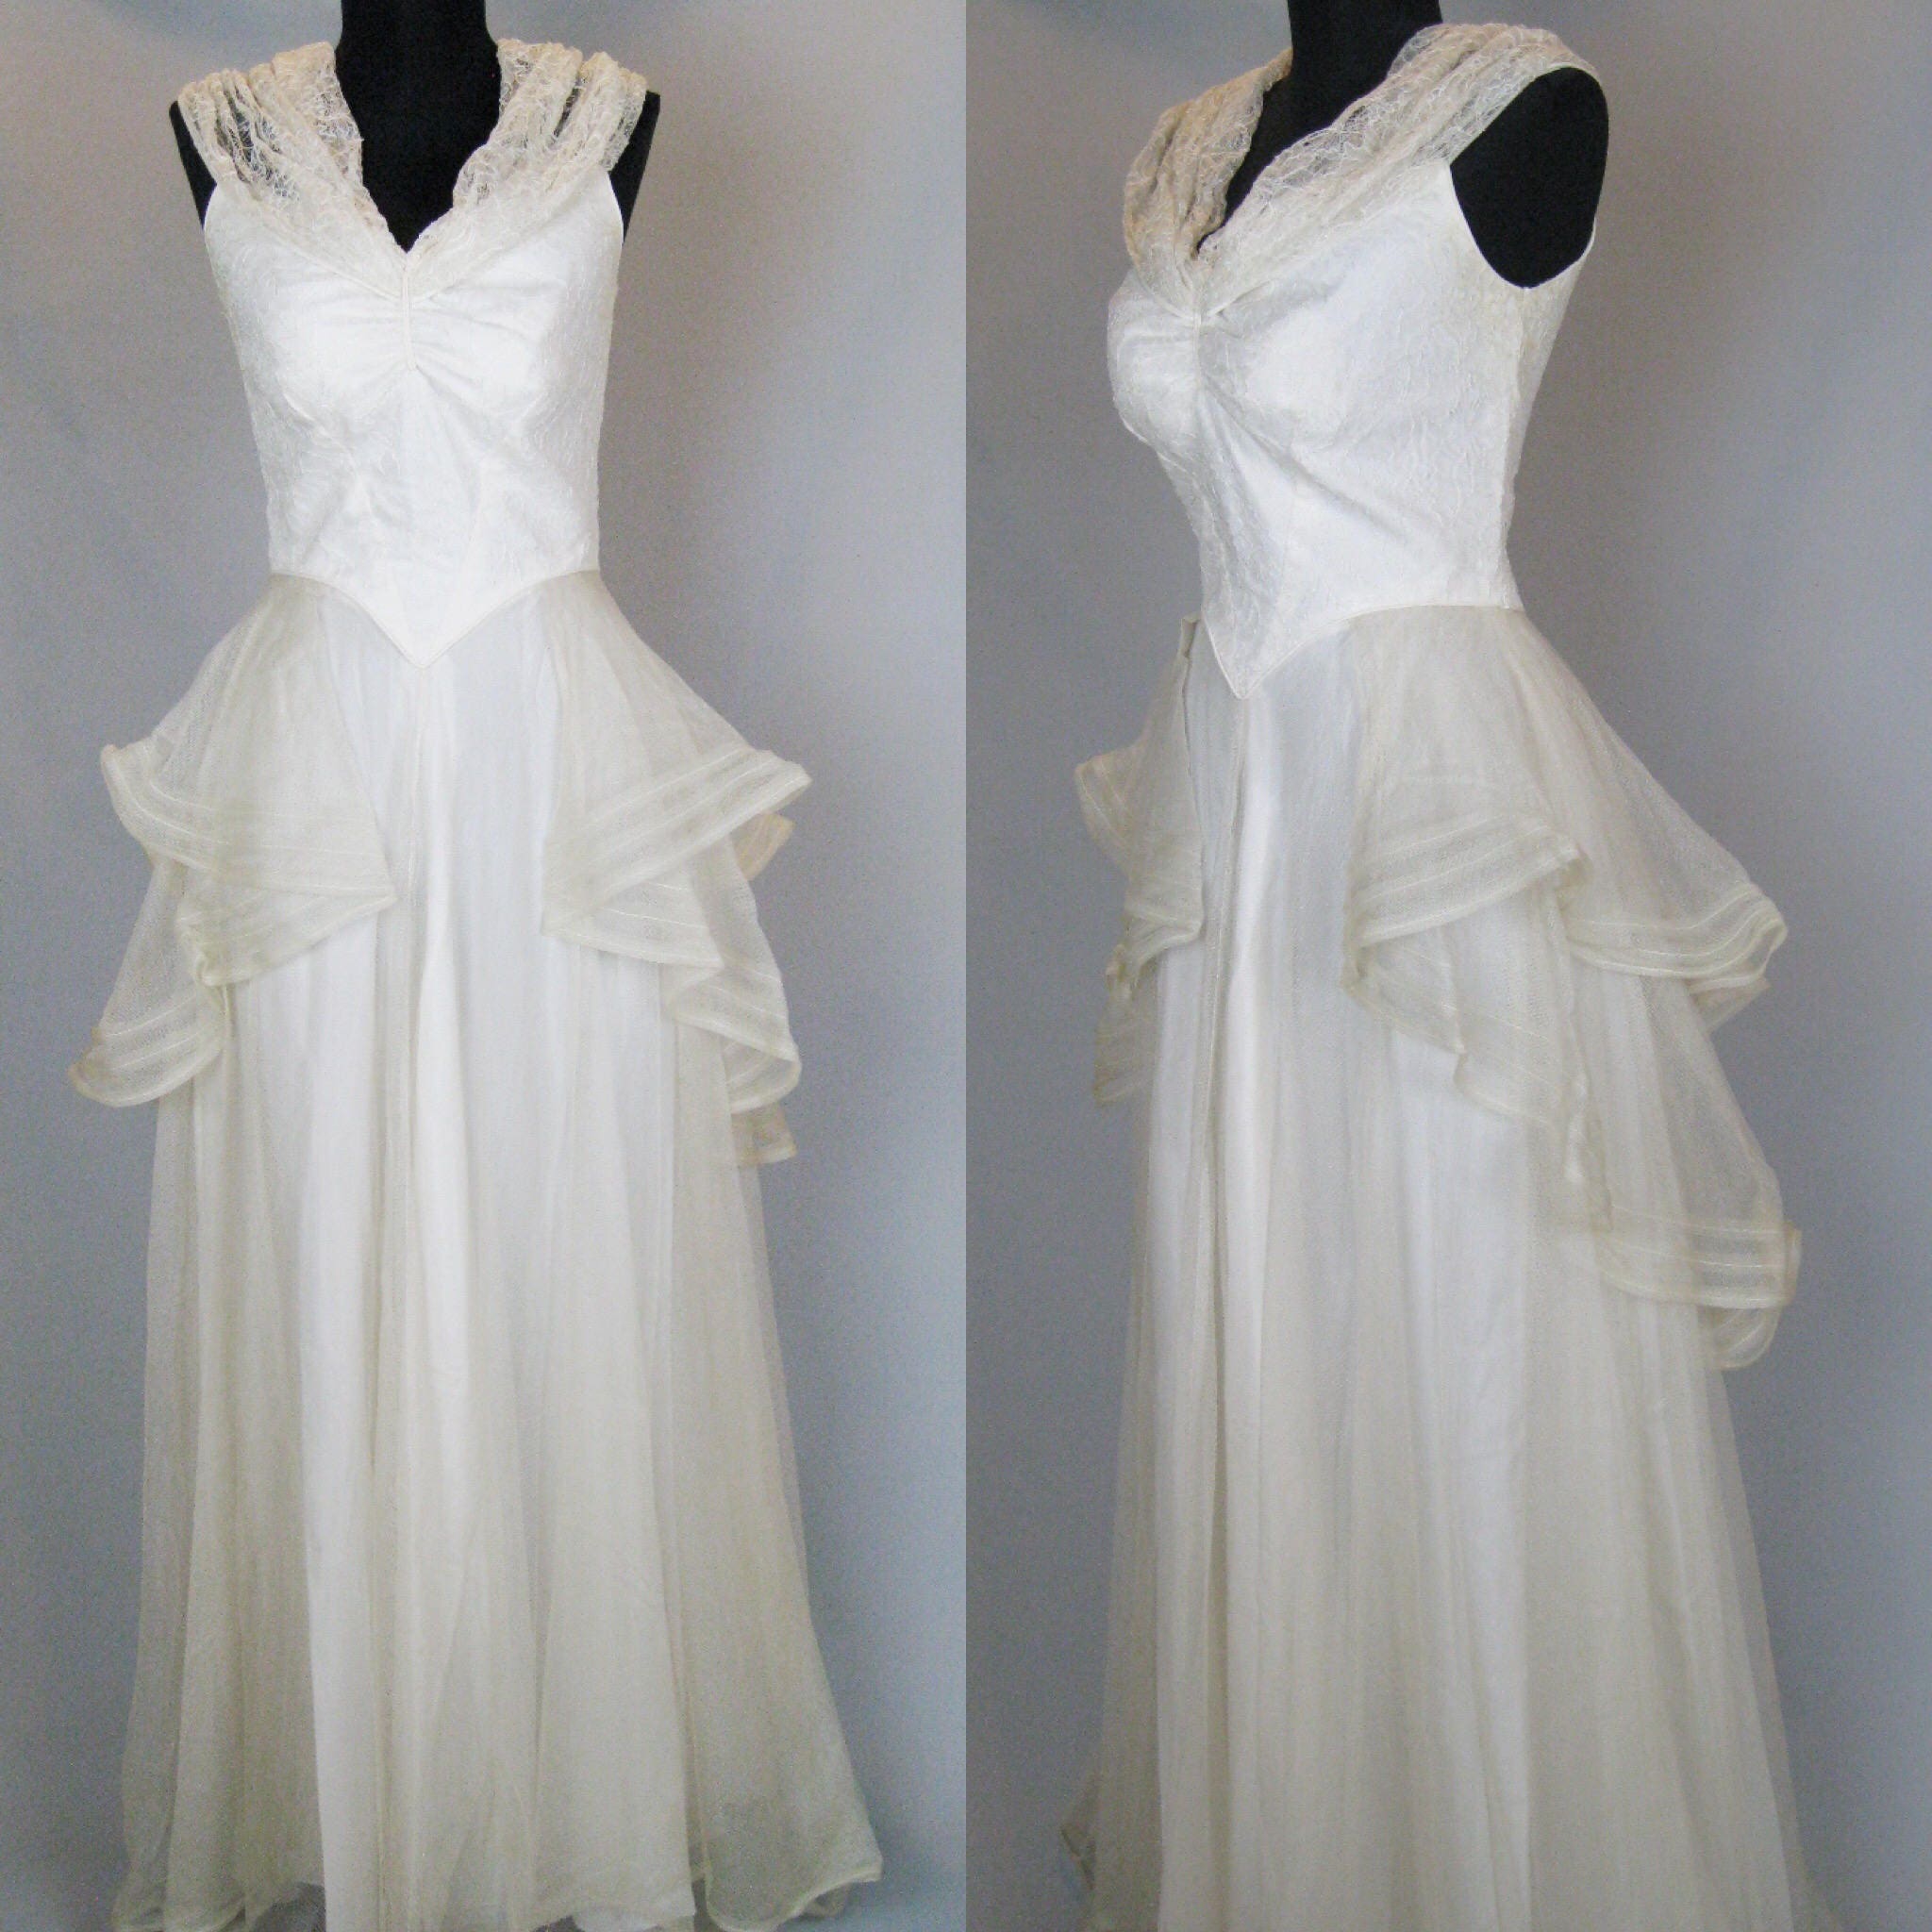 Wedding Dresses From The 1930s | 3d-mon.com